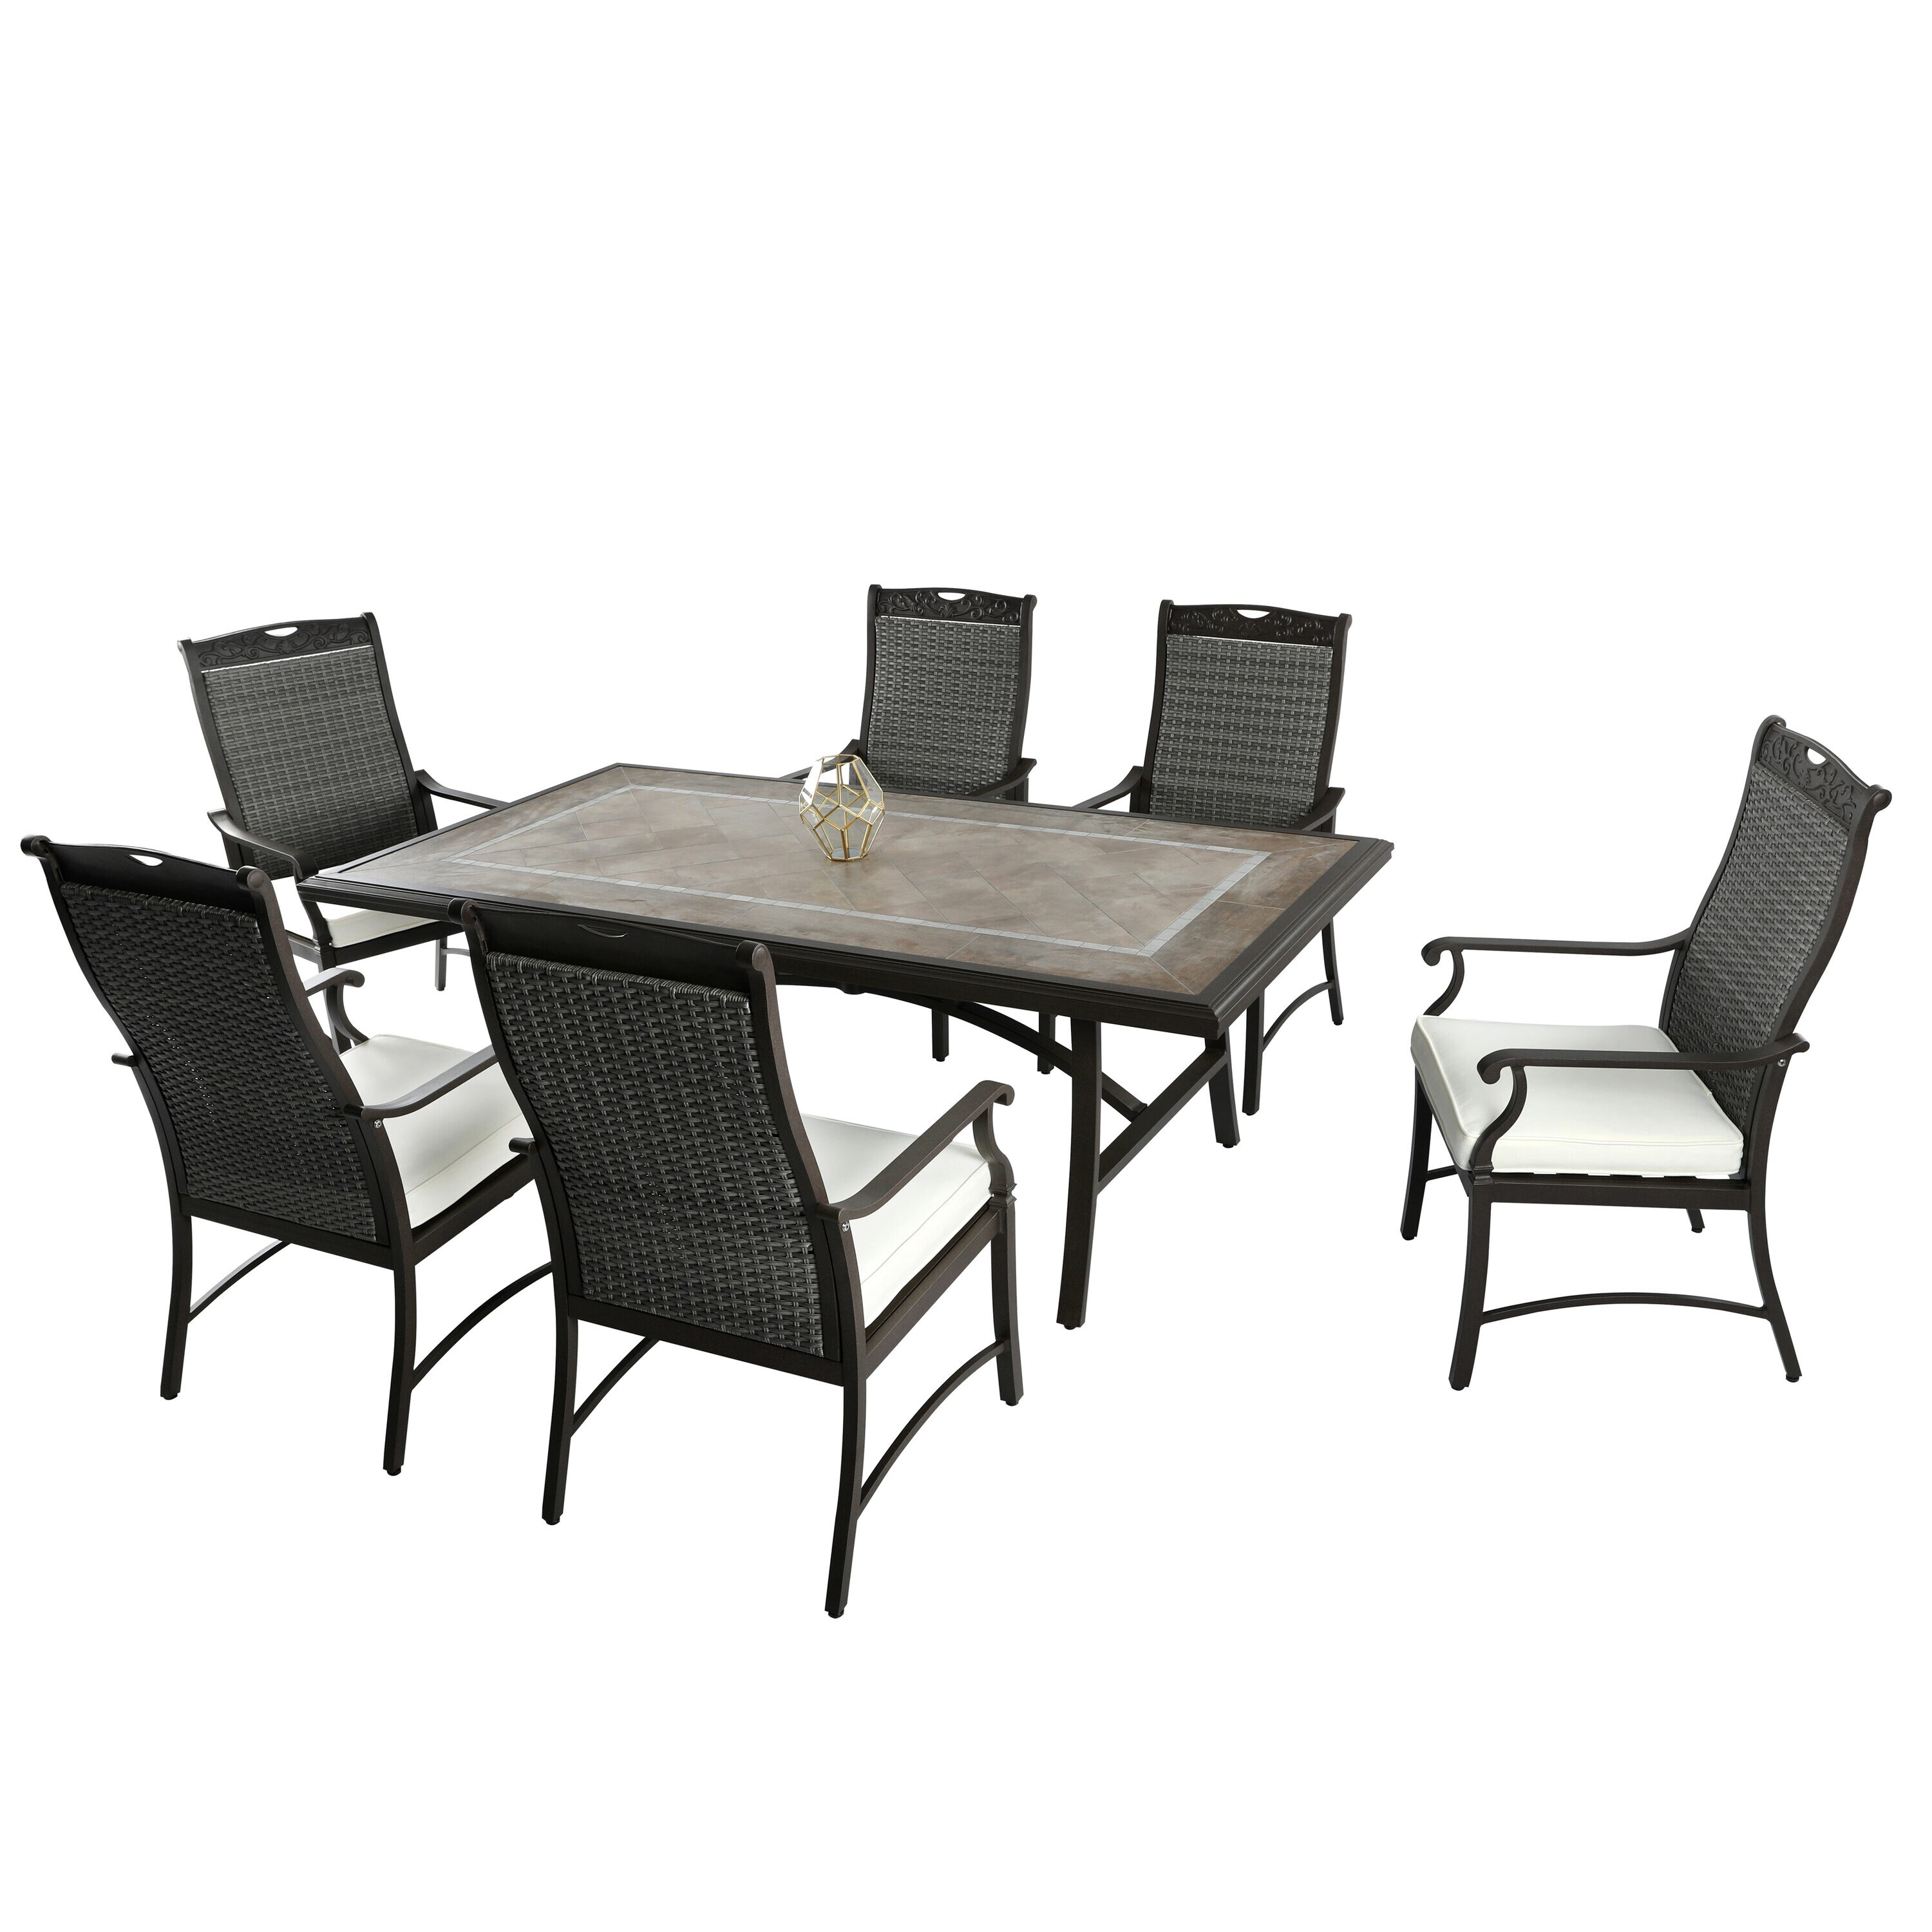 Patio time 7-Piece Black Rattan Patio Dining Set with Gray Cushions in ...